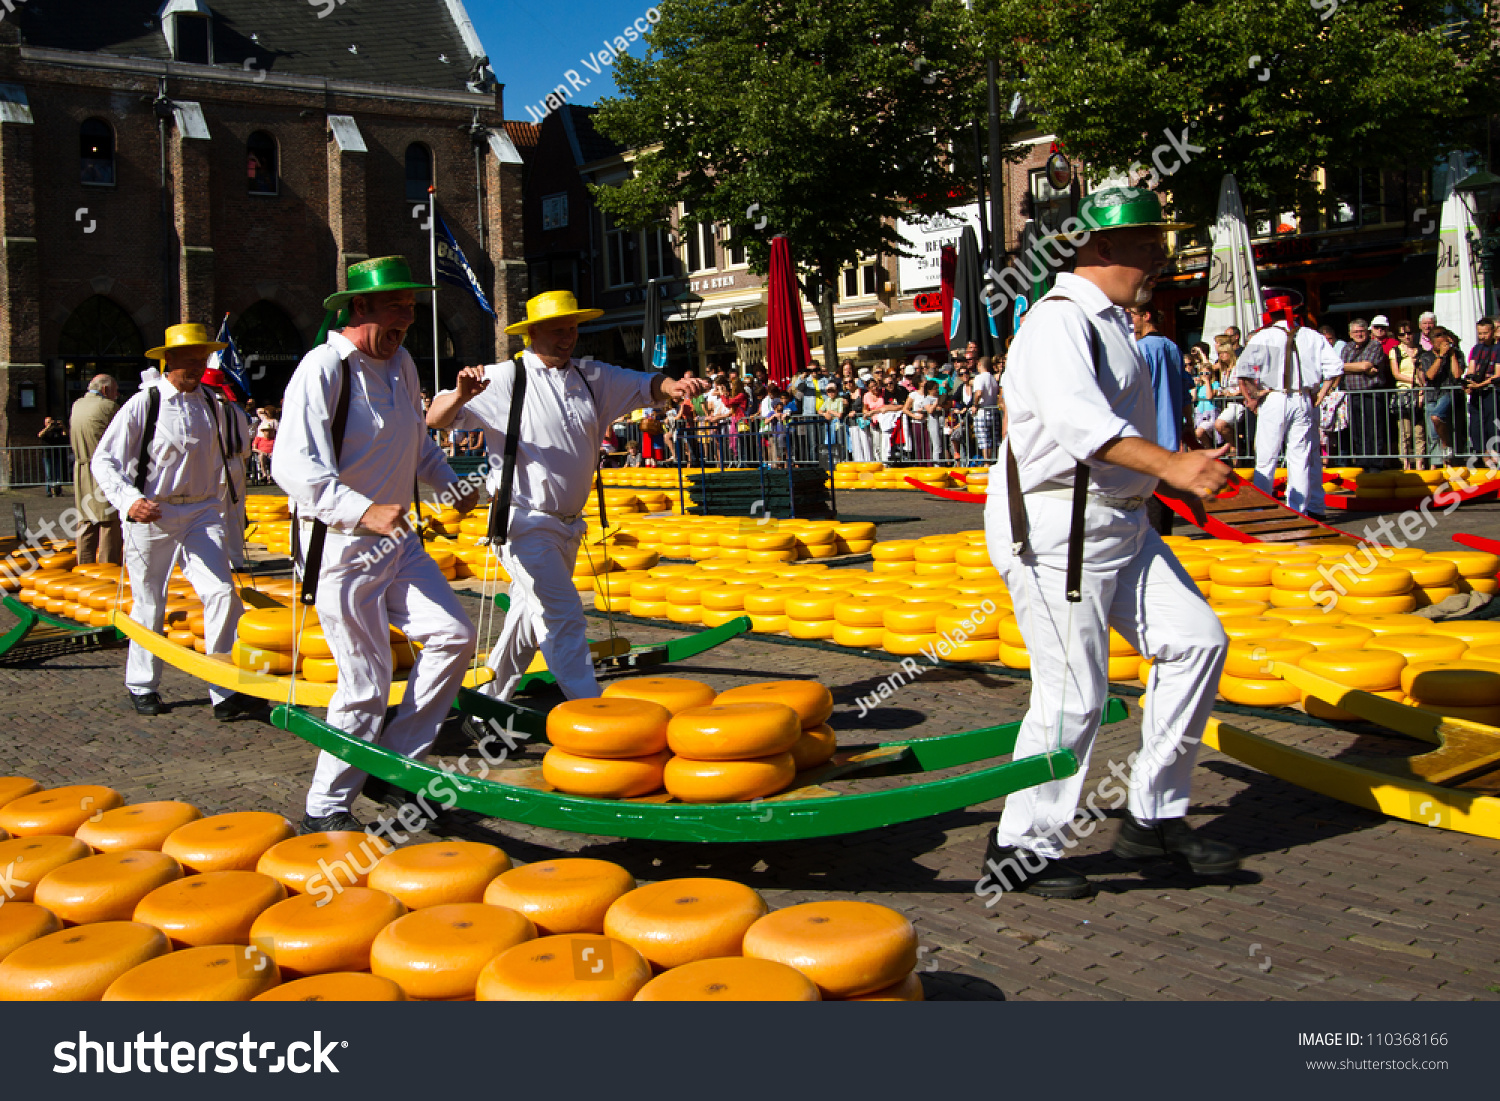 Alkmaar, Netherlands - August 10: Cheese Carriers At The Traditional ...